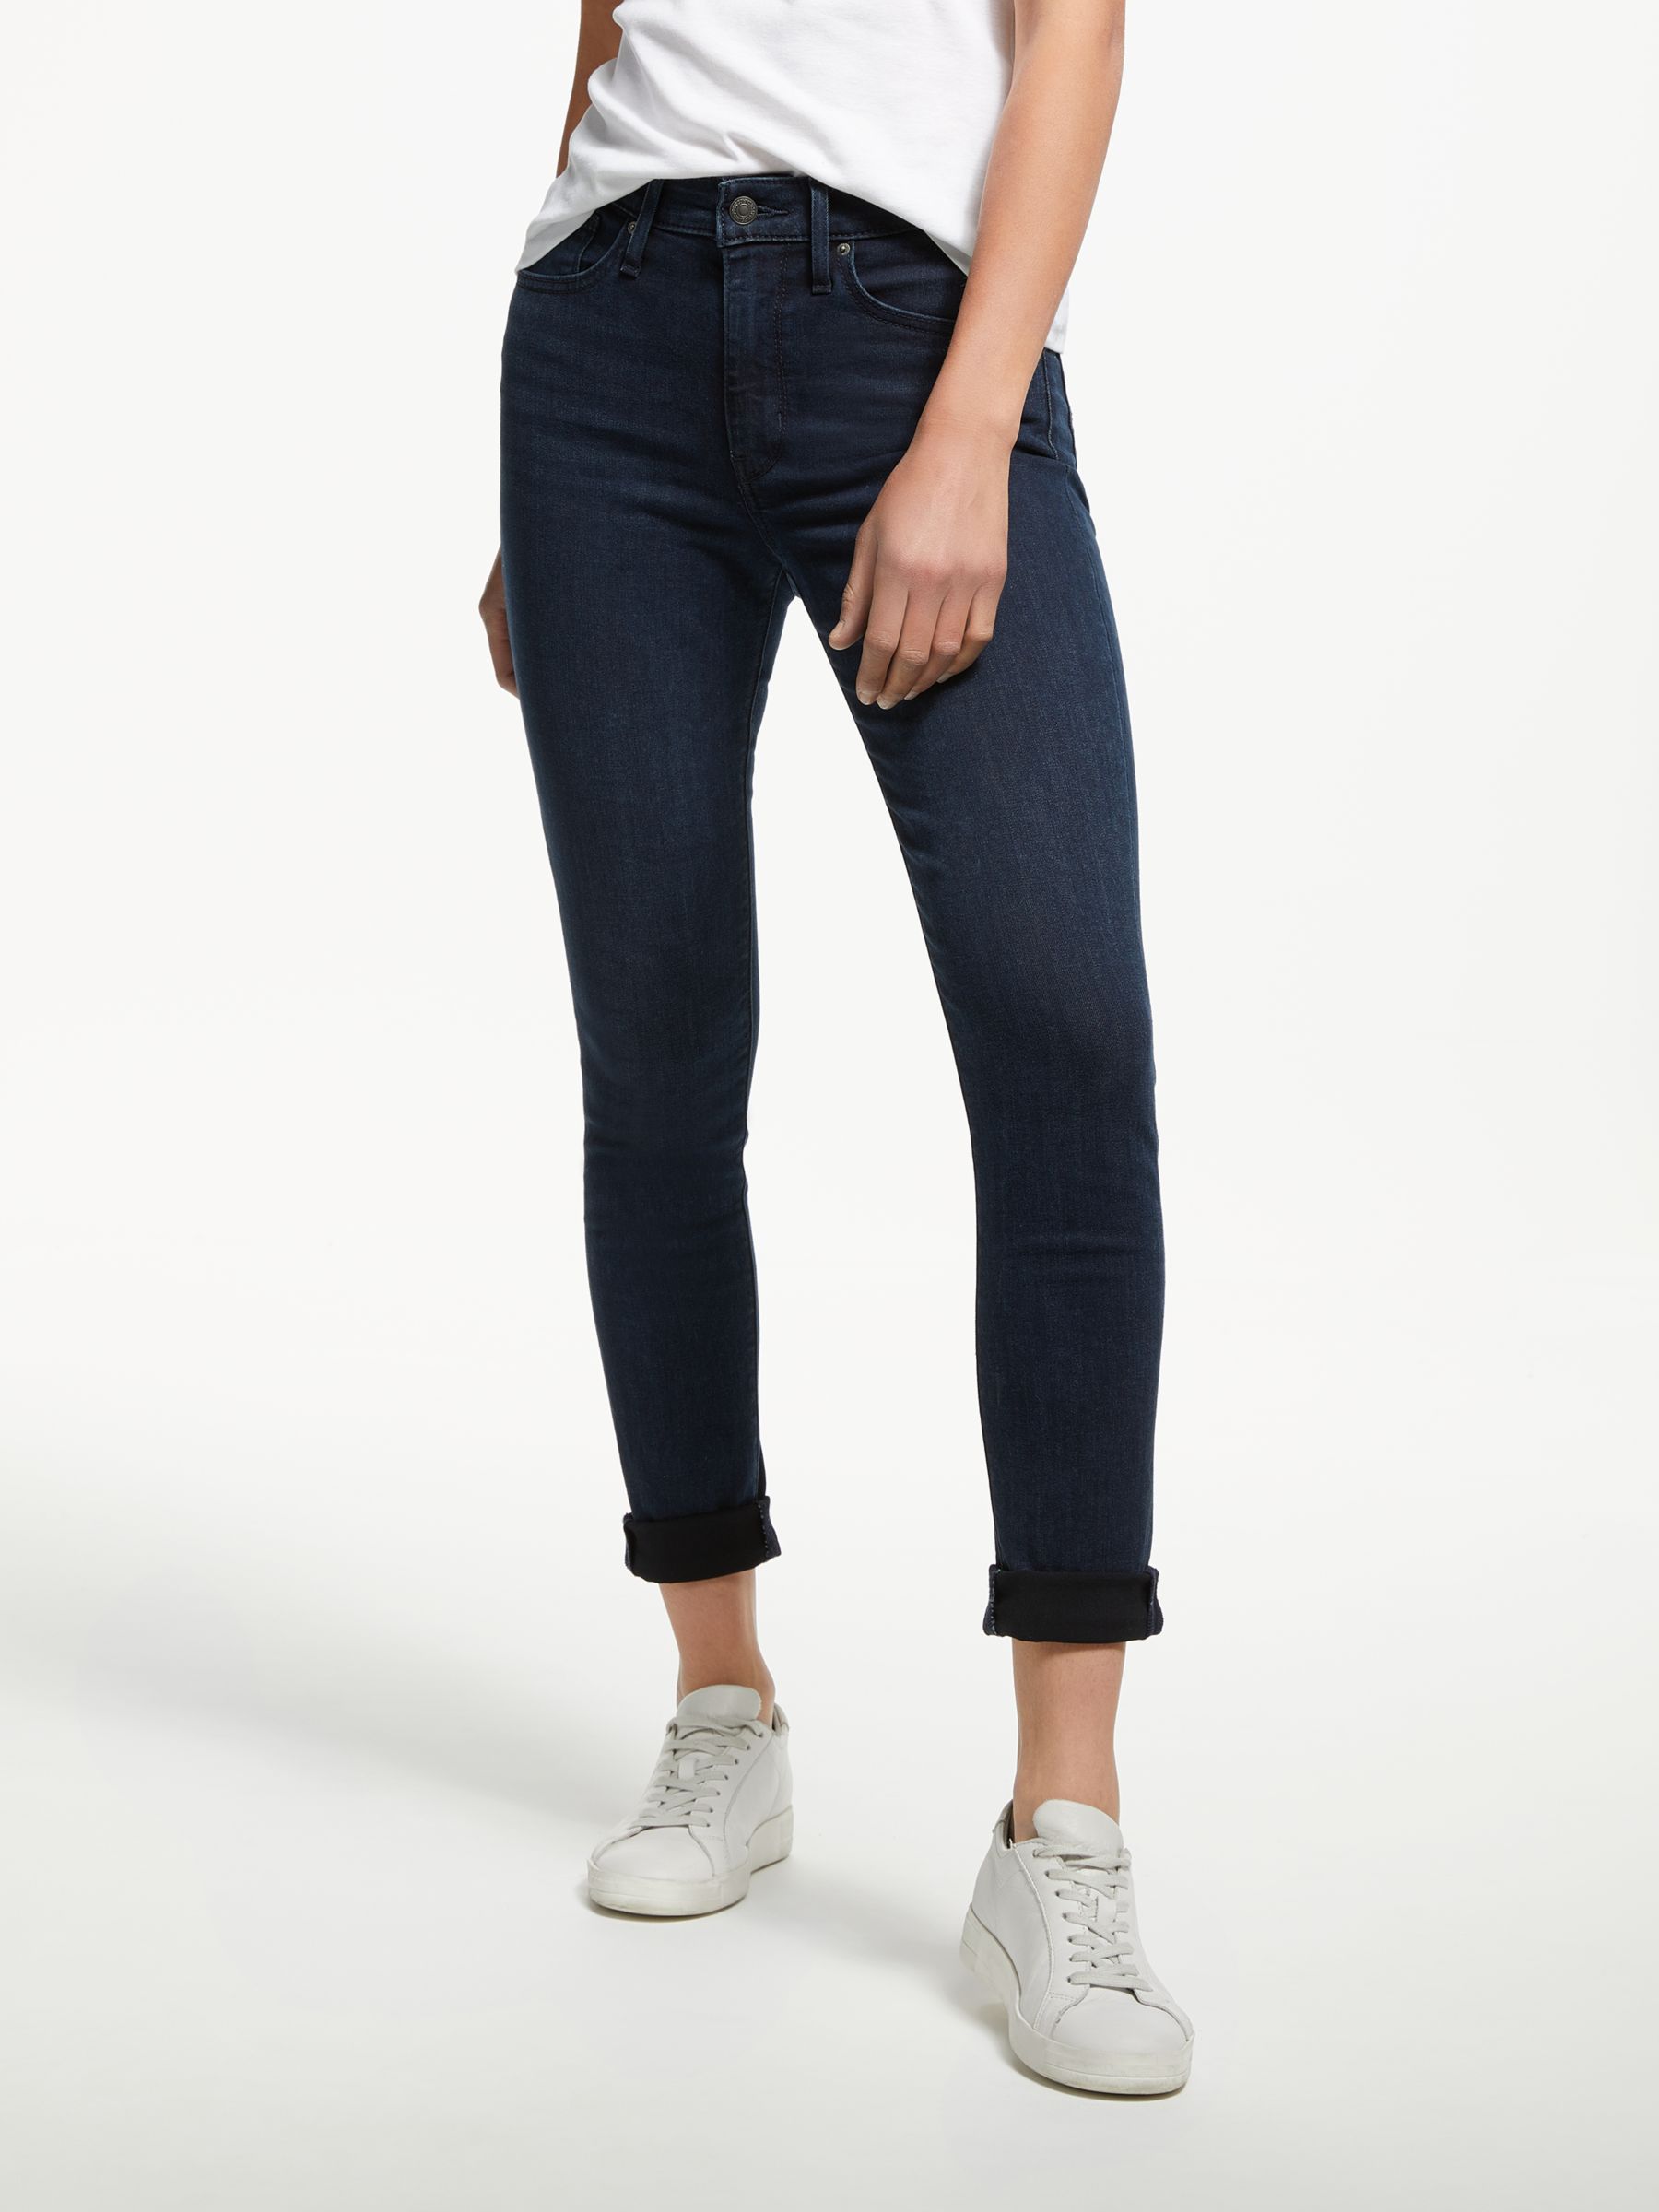 Levi's 721 High Rise Skinny Jeans, Rise Up